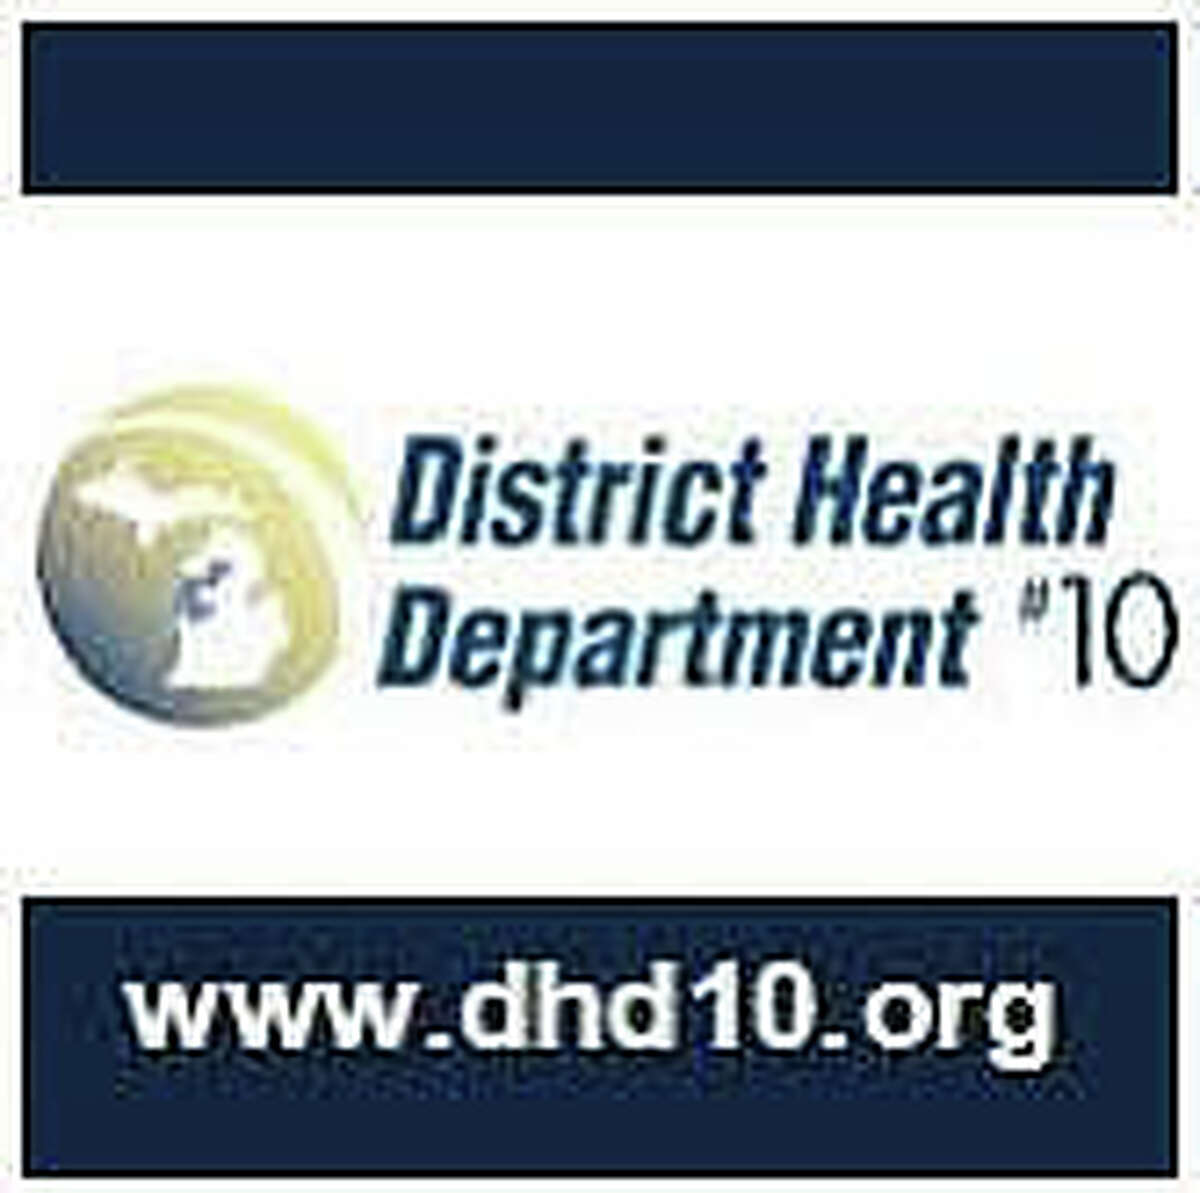 District Health Department No. 10 is advising anyone planning to travel over spring break get vaccinated ahead of time, as many destinations are requiring vaccination.